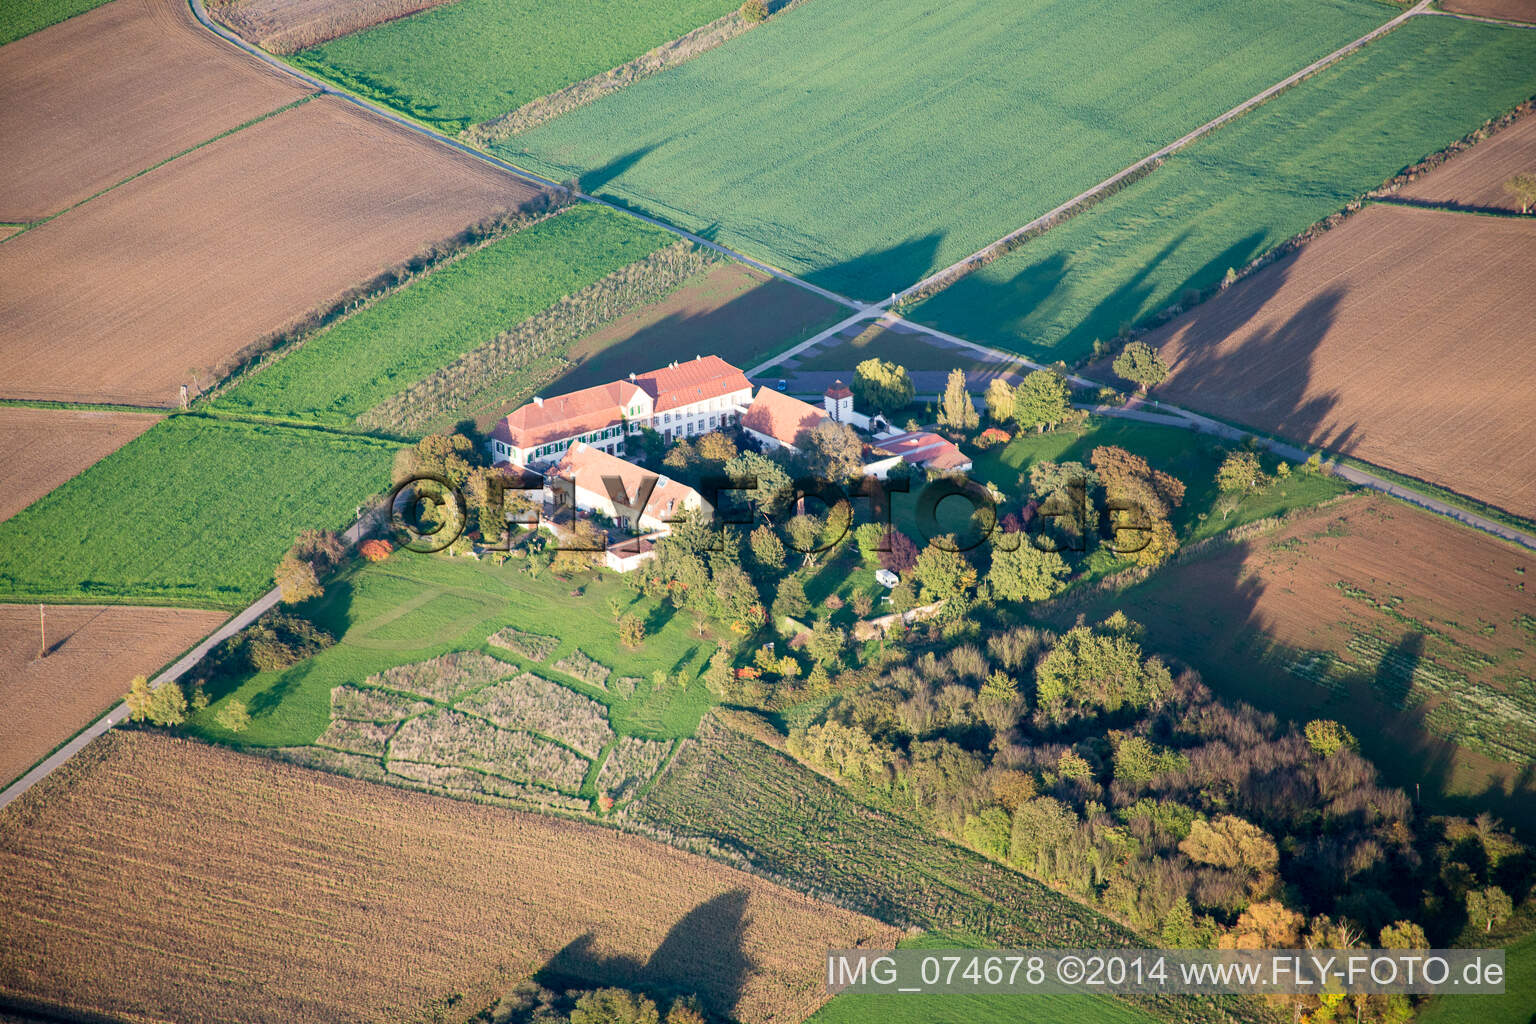 Workshop for Assisted Living of hidden Talents GmbH in the district Haftelhof in Schweighofen in the state Rhineland-Palatinate, Germany seen from above